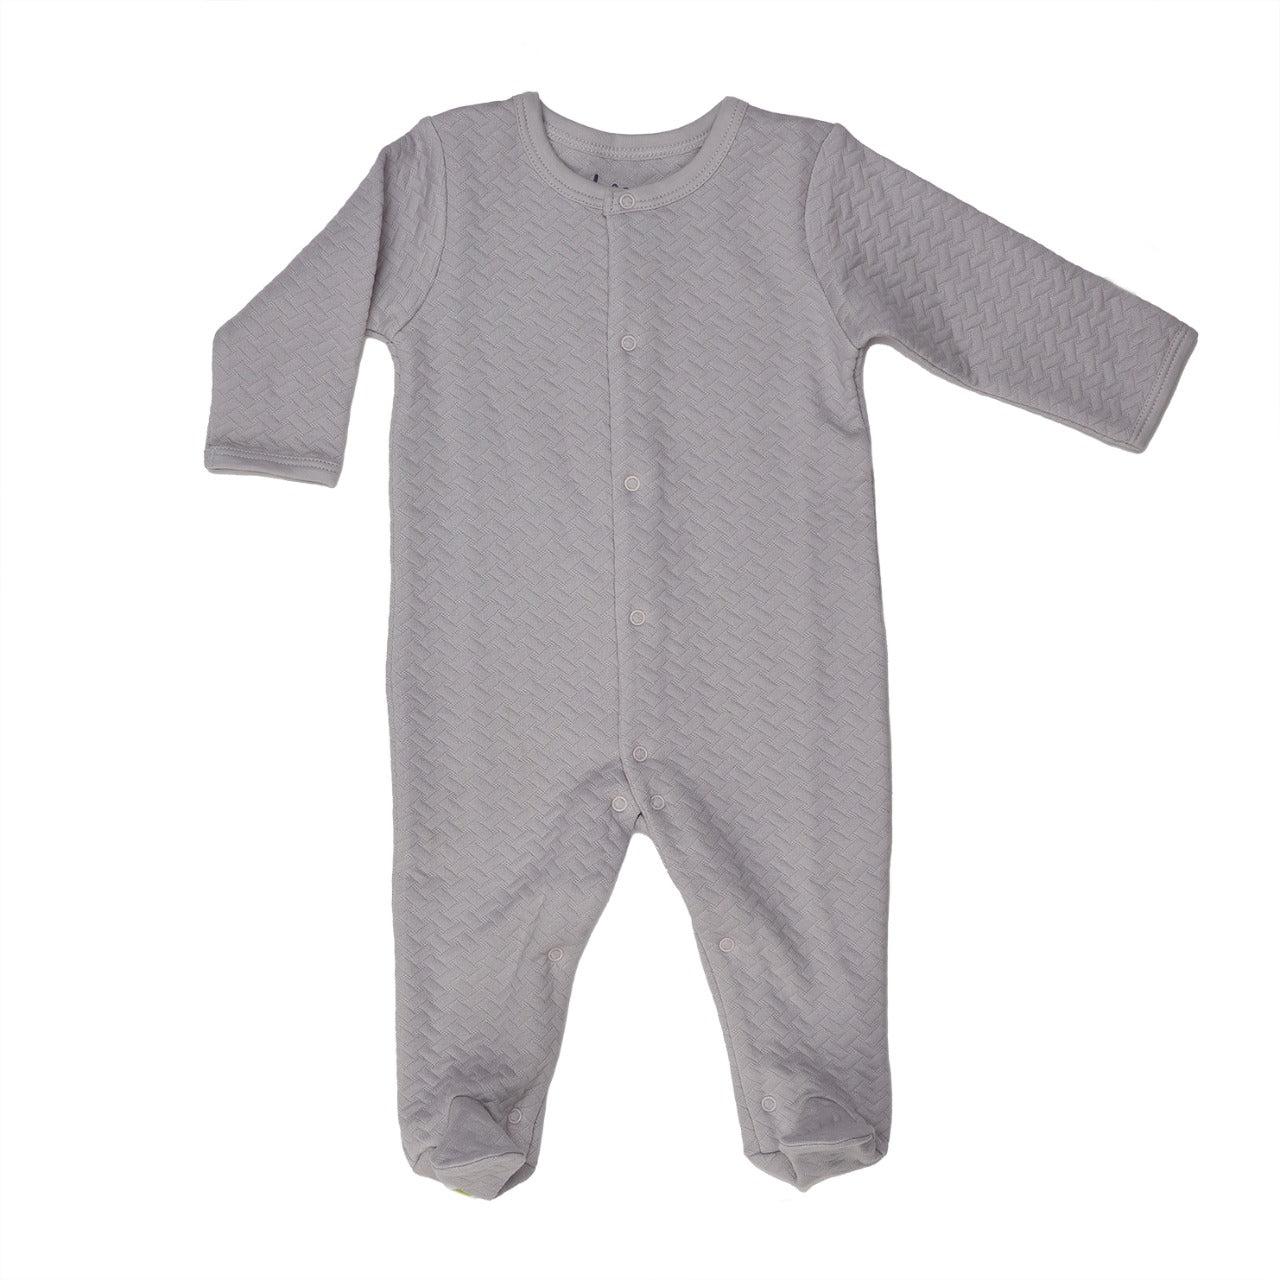 Layette | layette sets for newborn babies - Beezú Baby